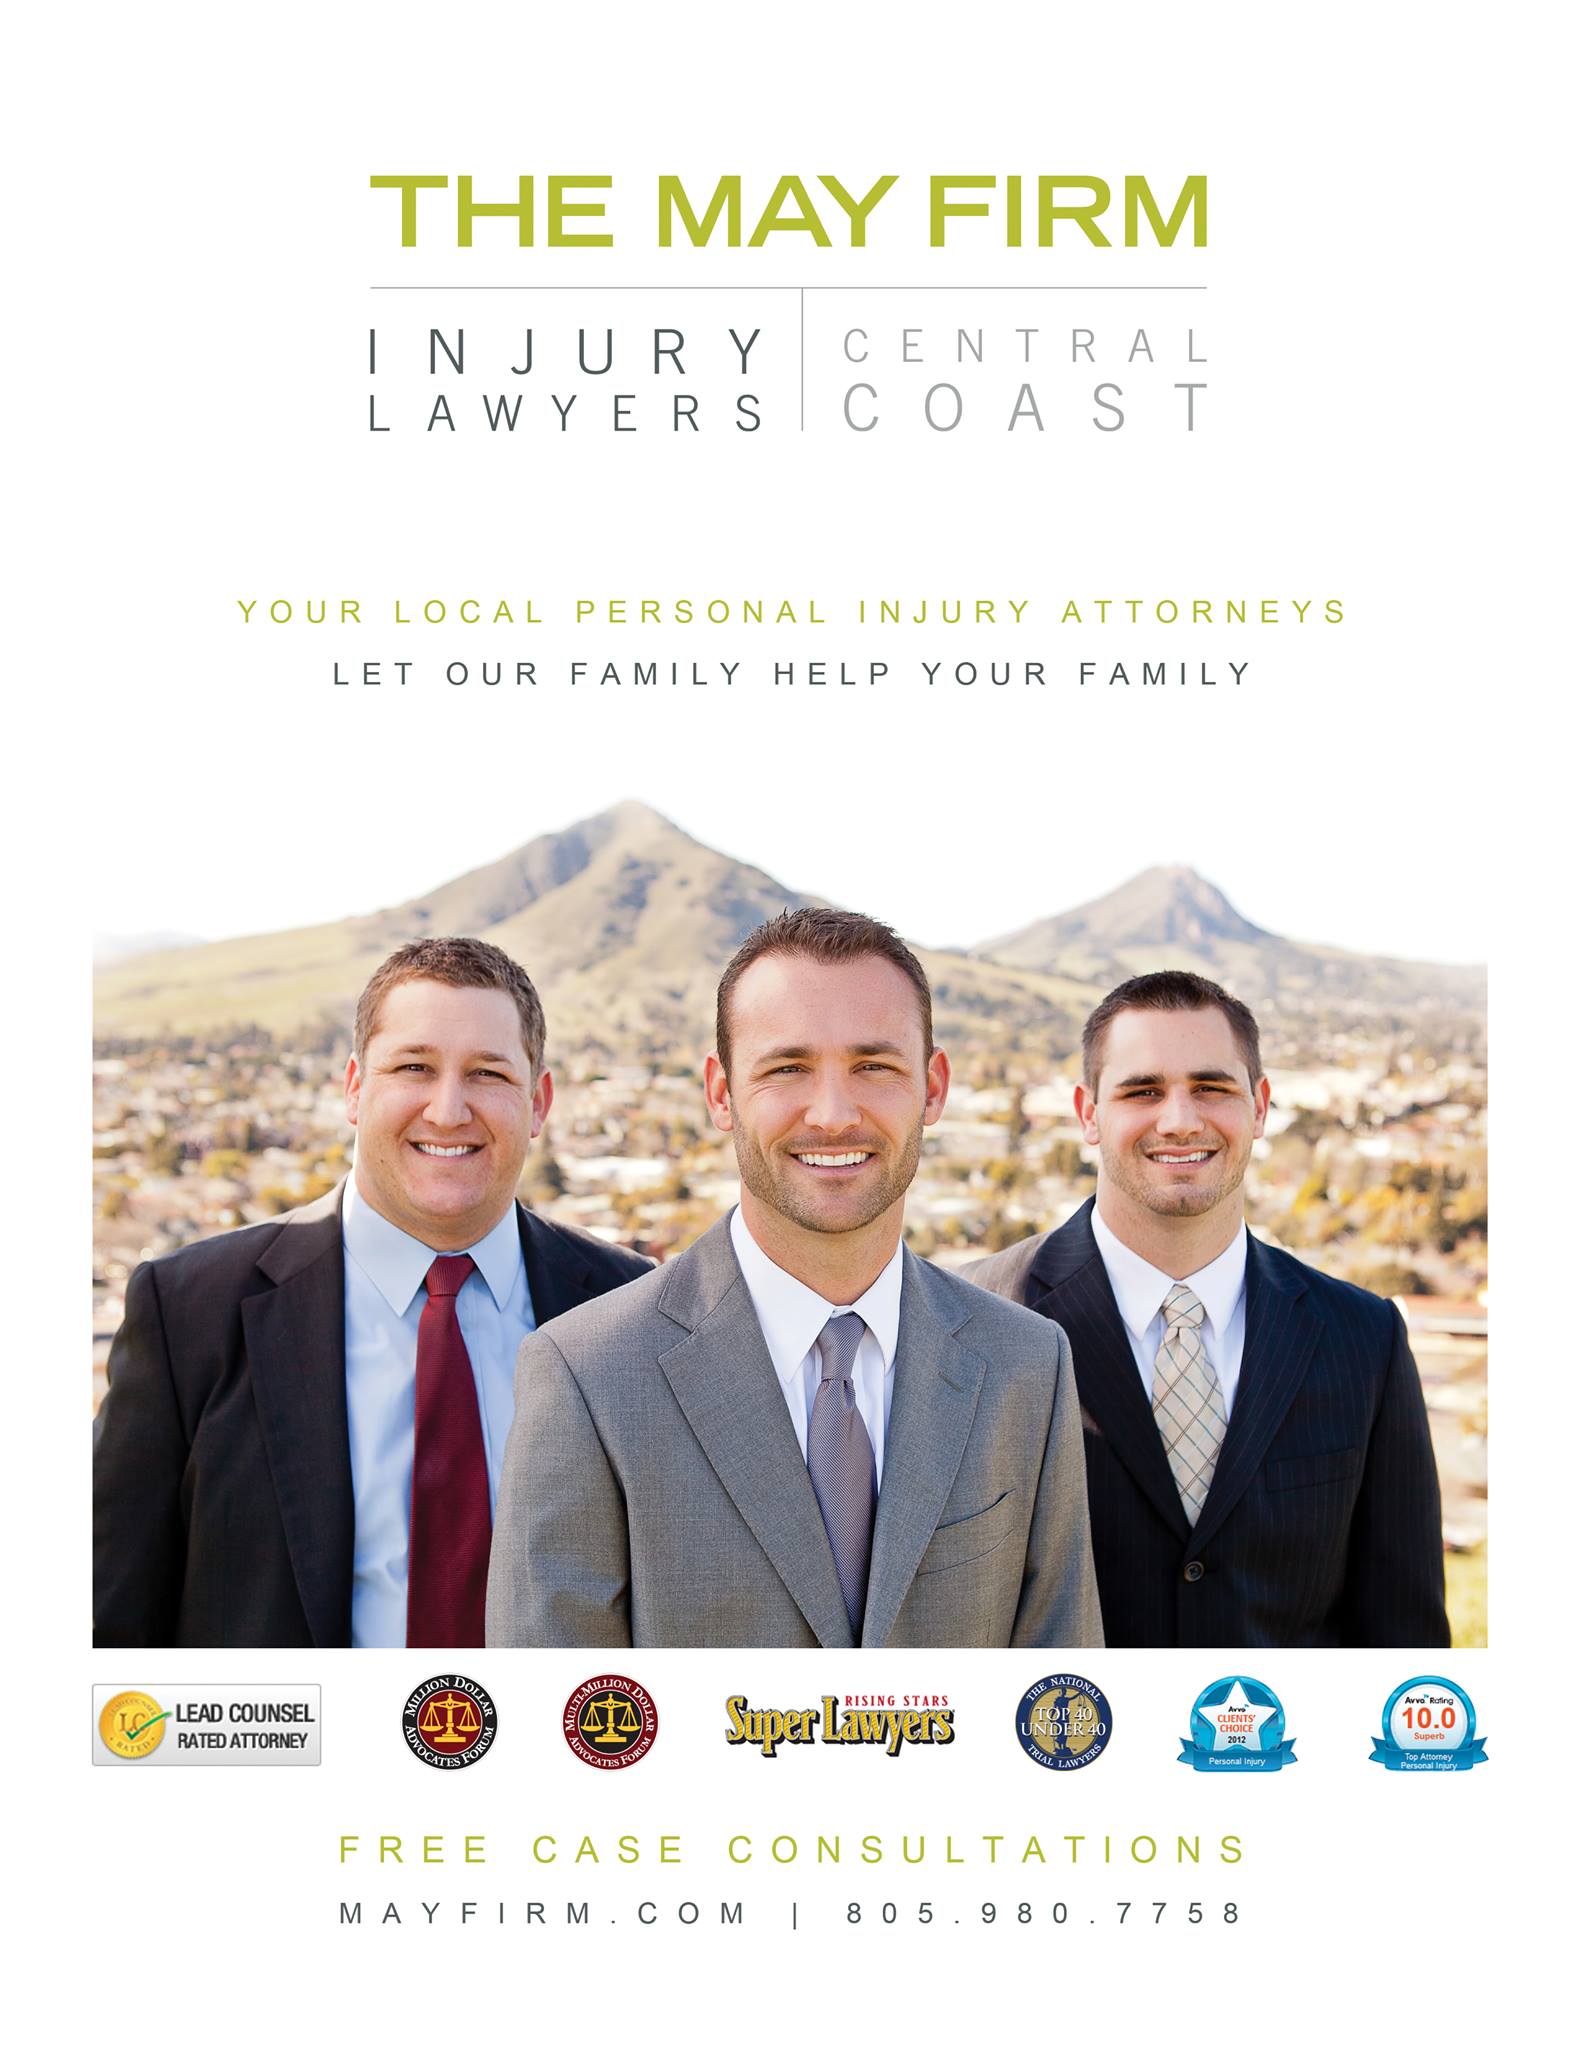 The May Firm Injury Lawyers | 853 Atlantic Ave Suite 201, Long Beach, CA 90813, United States | Phone: (562) 800-0529